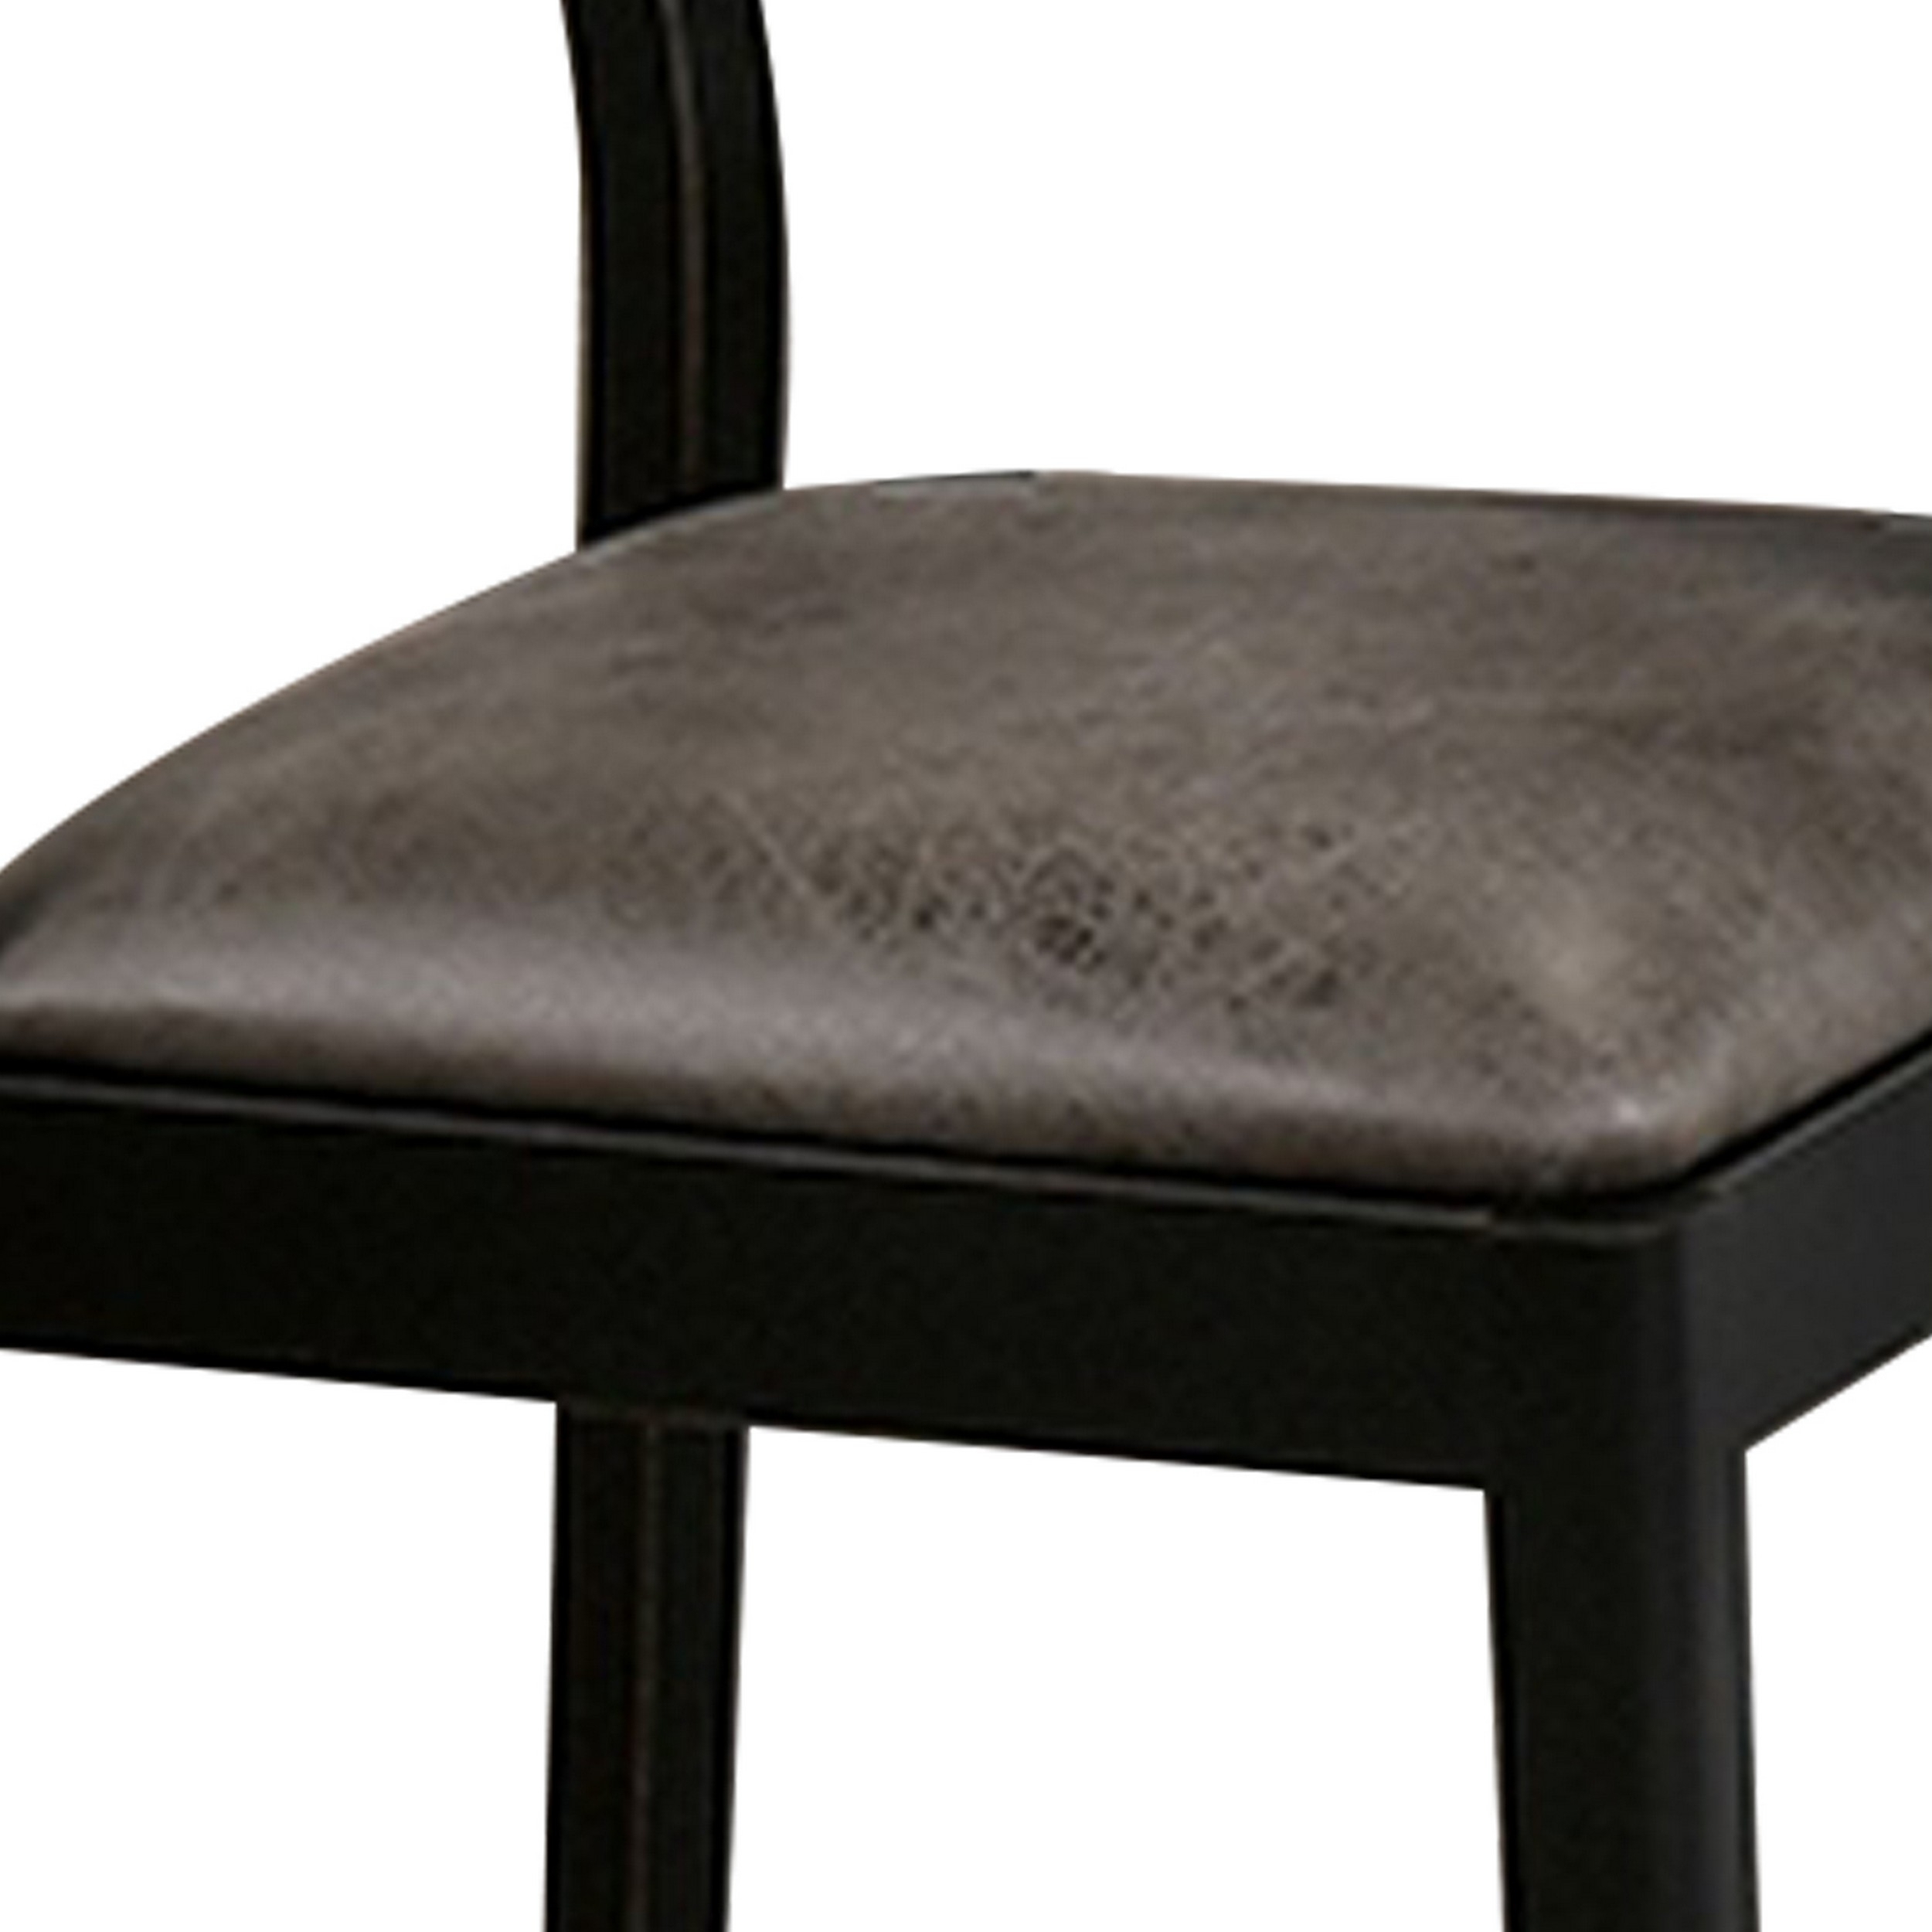 Riera 17 Inch Dining Chair, Gray Faux Leather Seat, Angled Backrest, Black- Saltoro Sherpi